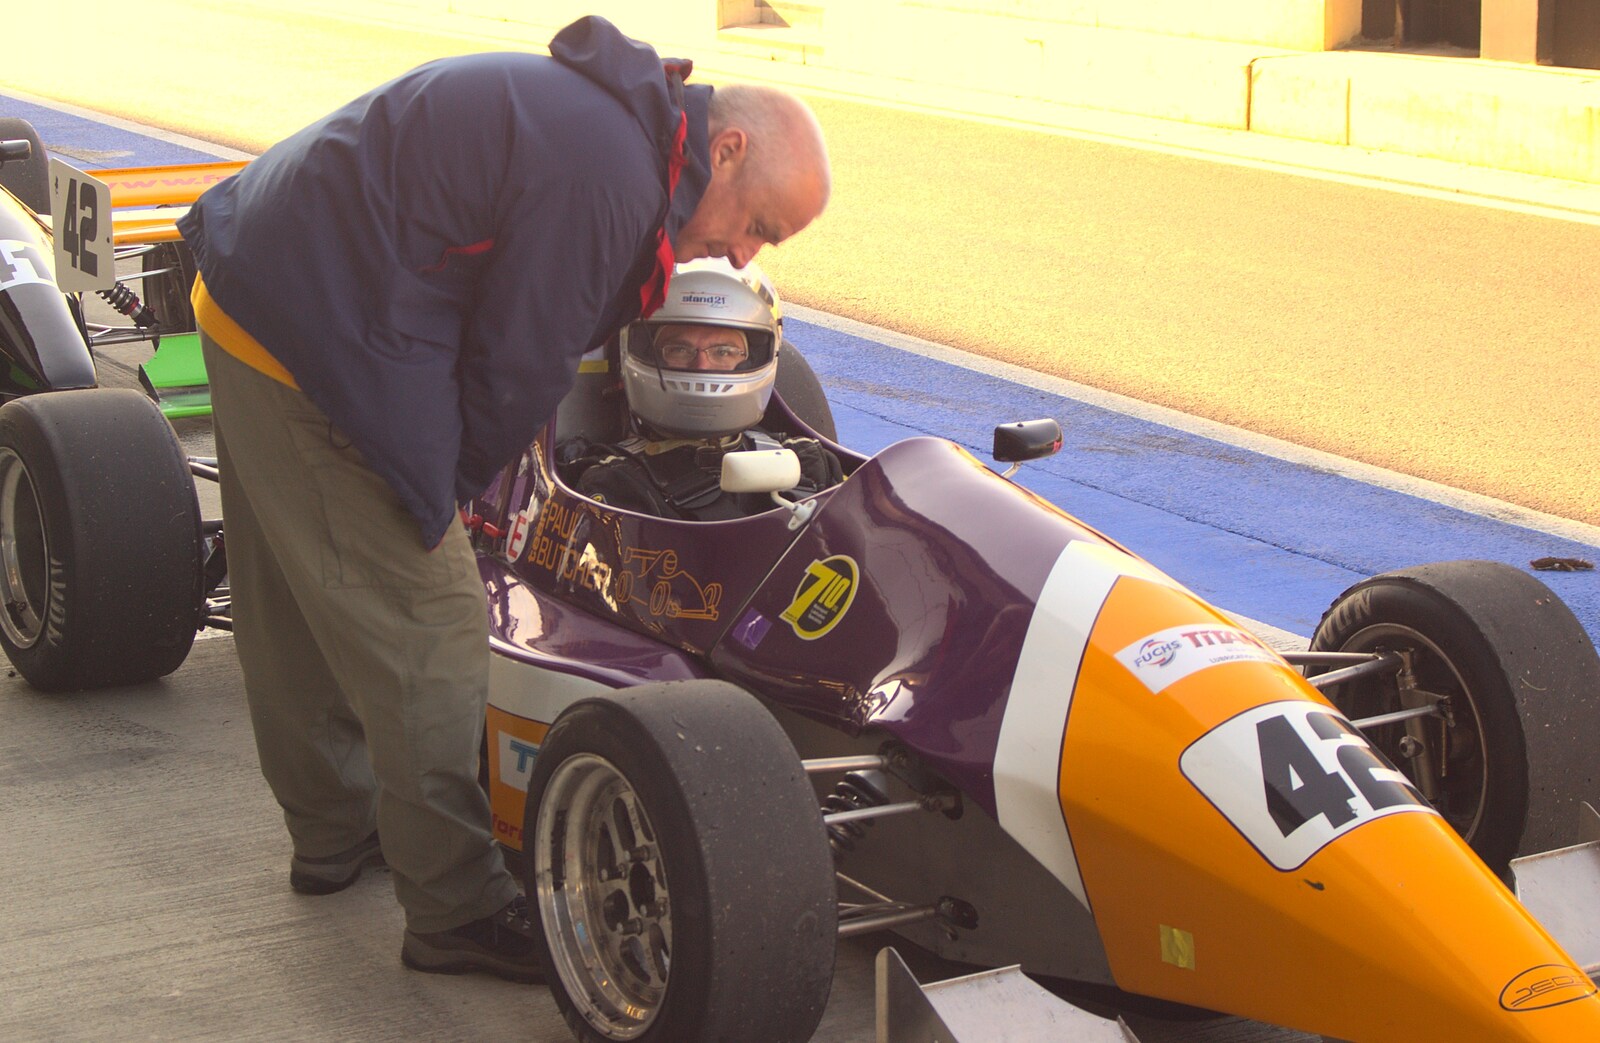 A bit of team talk from TouchType at Silverstone, Northamptonshire - 22nd October 2011